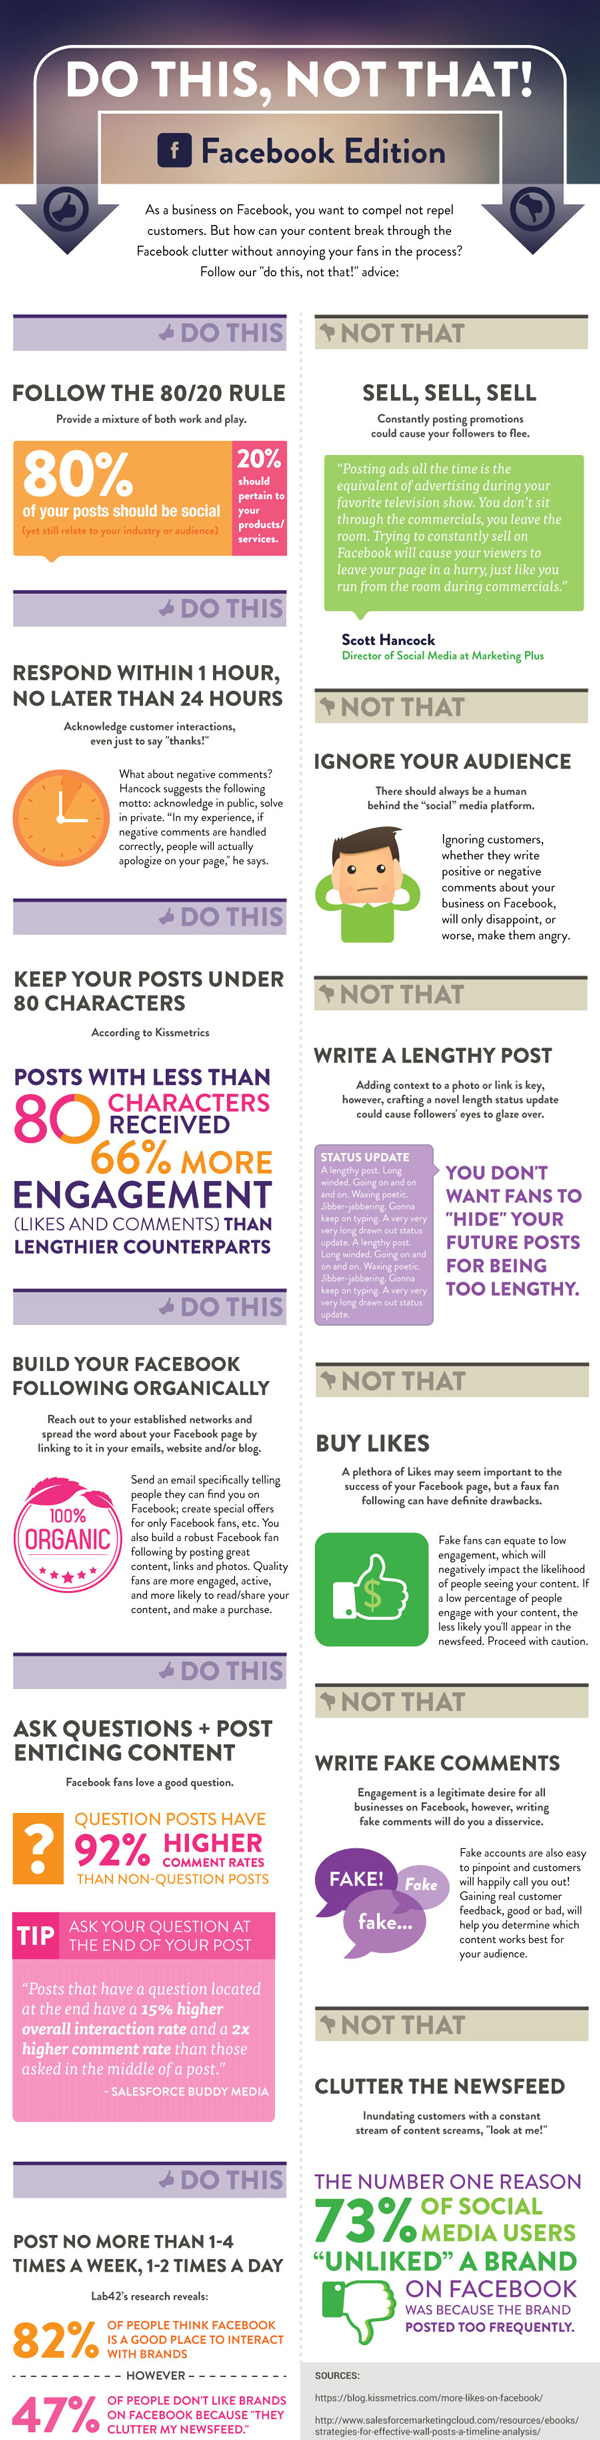 do-this-not-that-facebook-edition-infographic.jpg